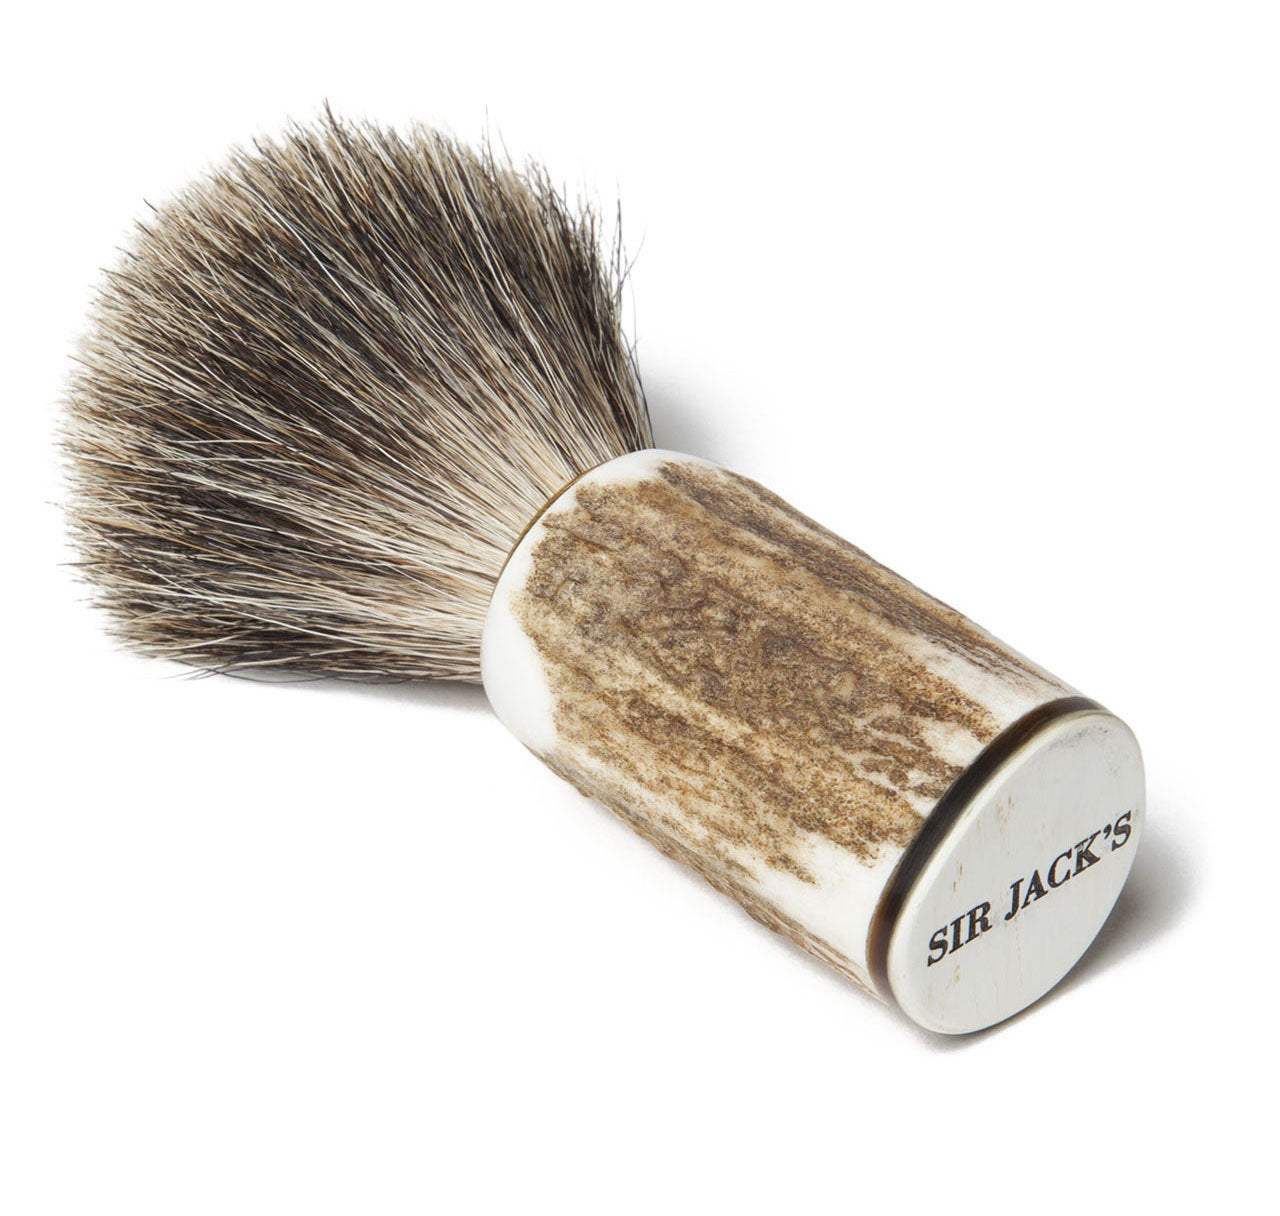 Stag Handle Badger Brush